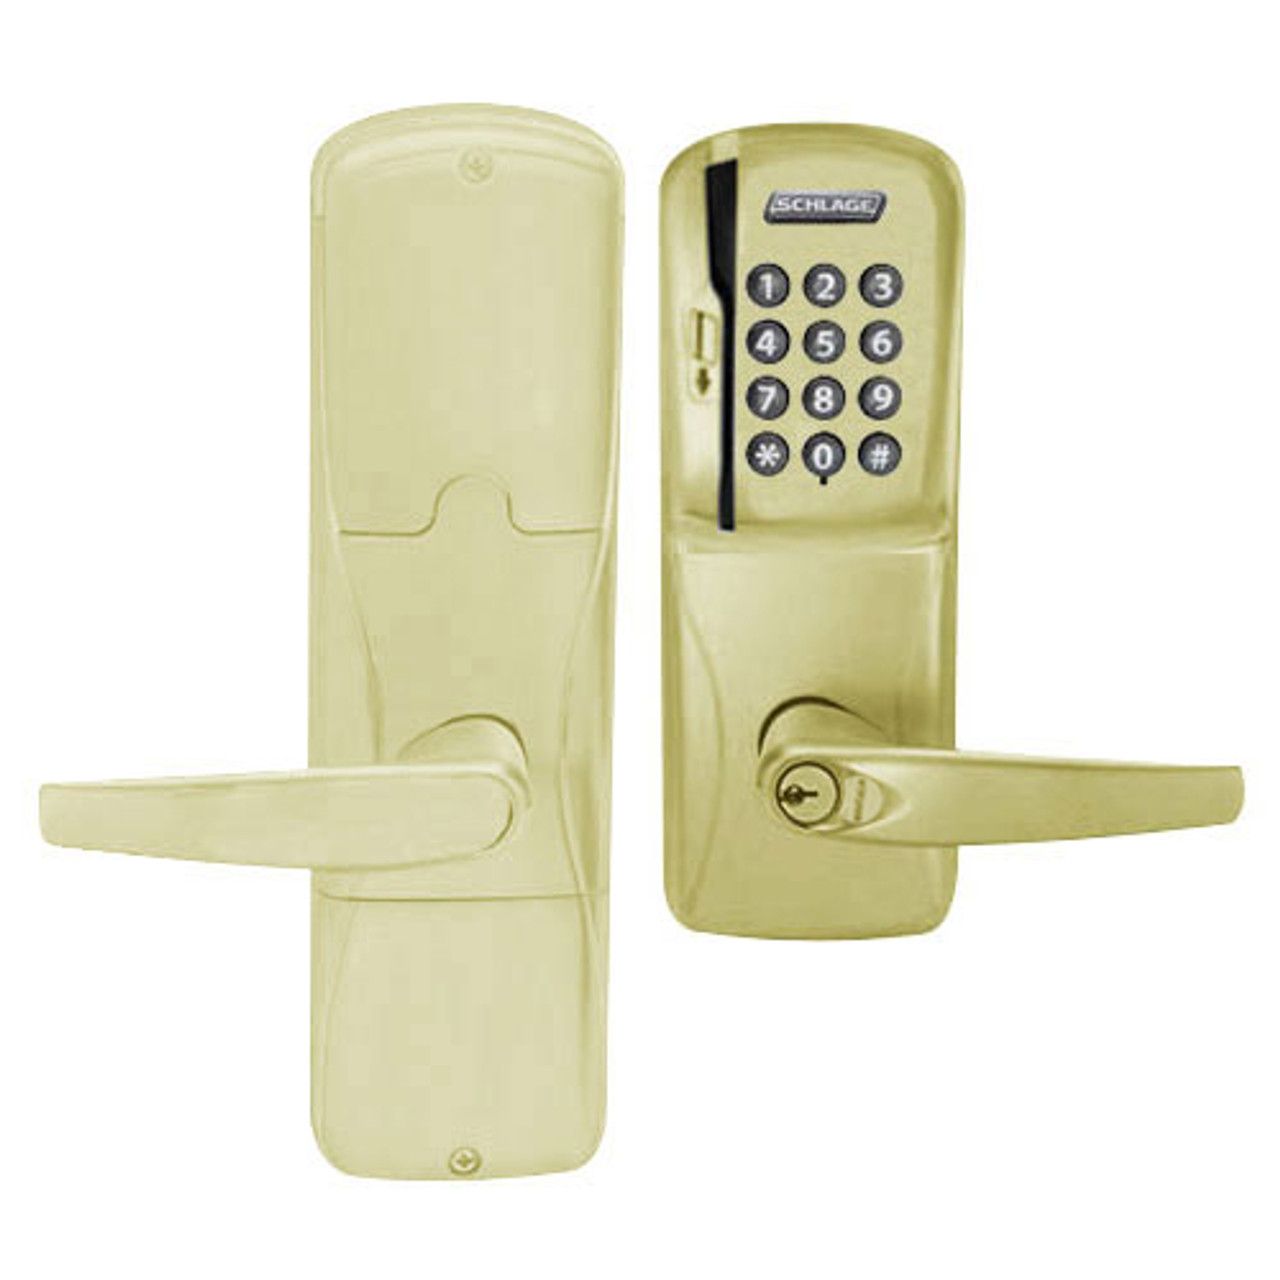 AD200-MD-40-MSK-ATH-GD-29R-606 Schlage Privacy Mortise Deadbolt Magnetic Stripe Keypad Lock with Athens Lever in Satin Brass